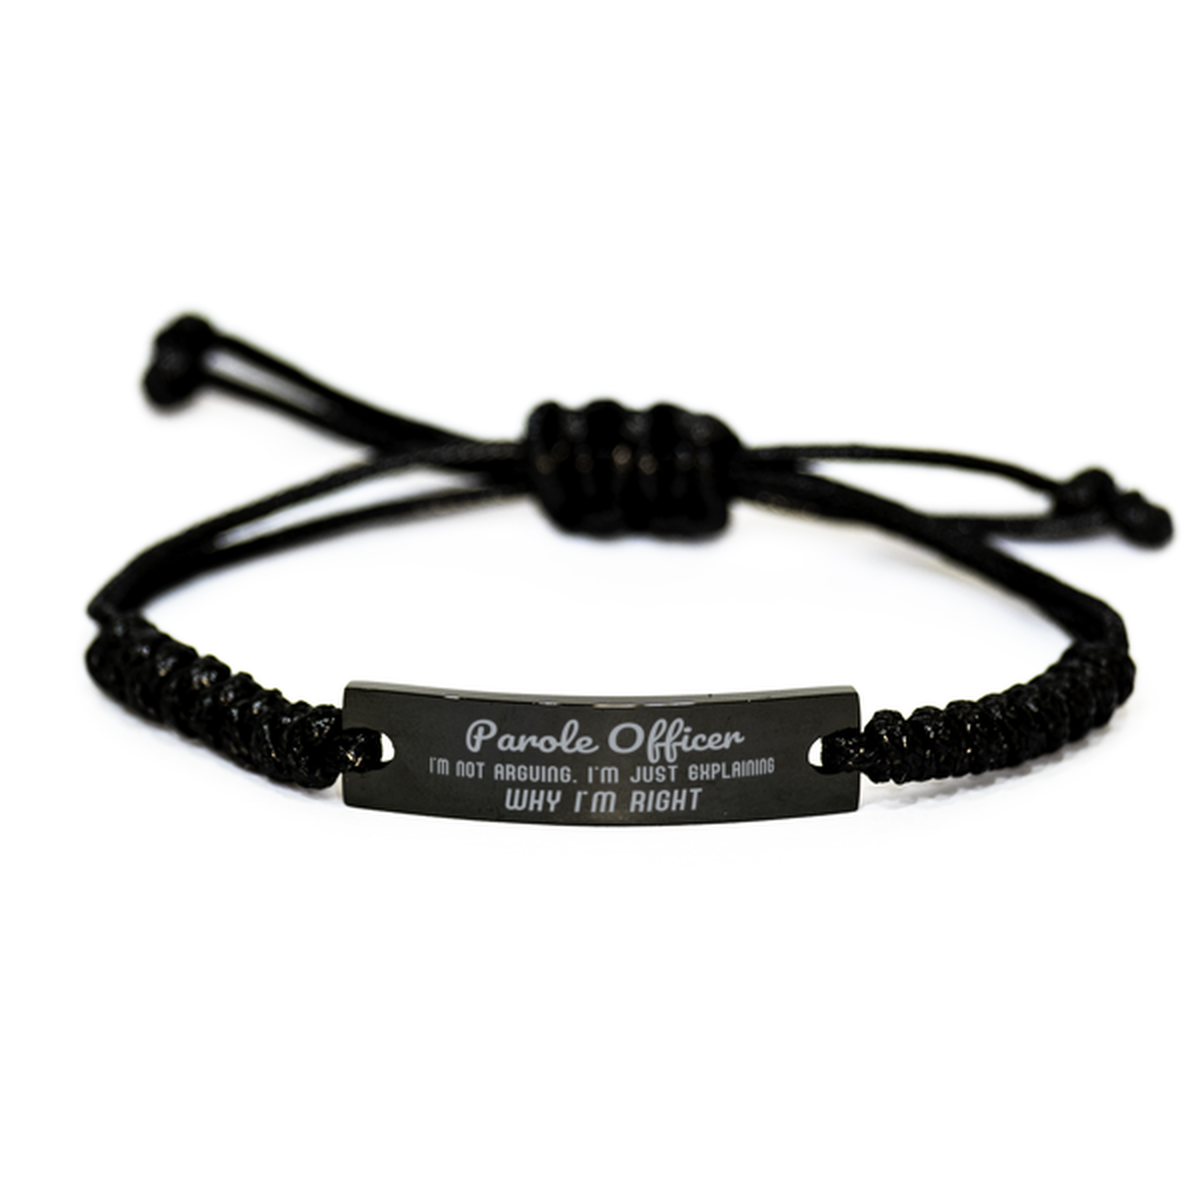 Parole Officer I'm not Arguing. I'm Just Explaining Why I'm RIGHT Black Rope Bracelet, Funny Saying Quote Parole Officer Gifts For Parole Officer Graduation Birthday Christmas Gifts for Men Women Coworker